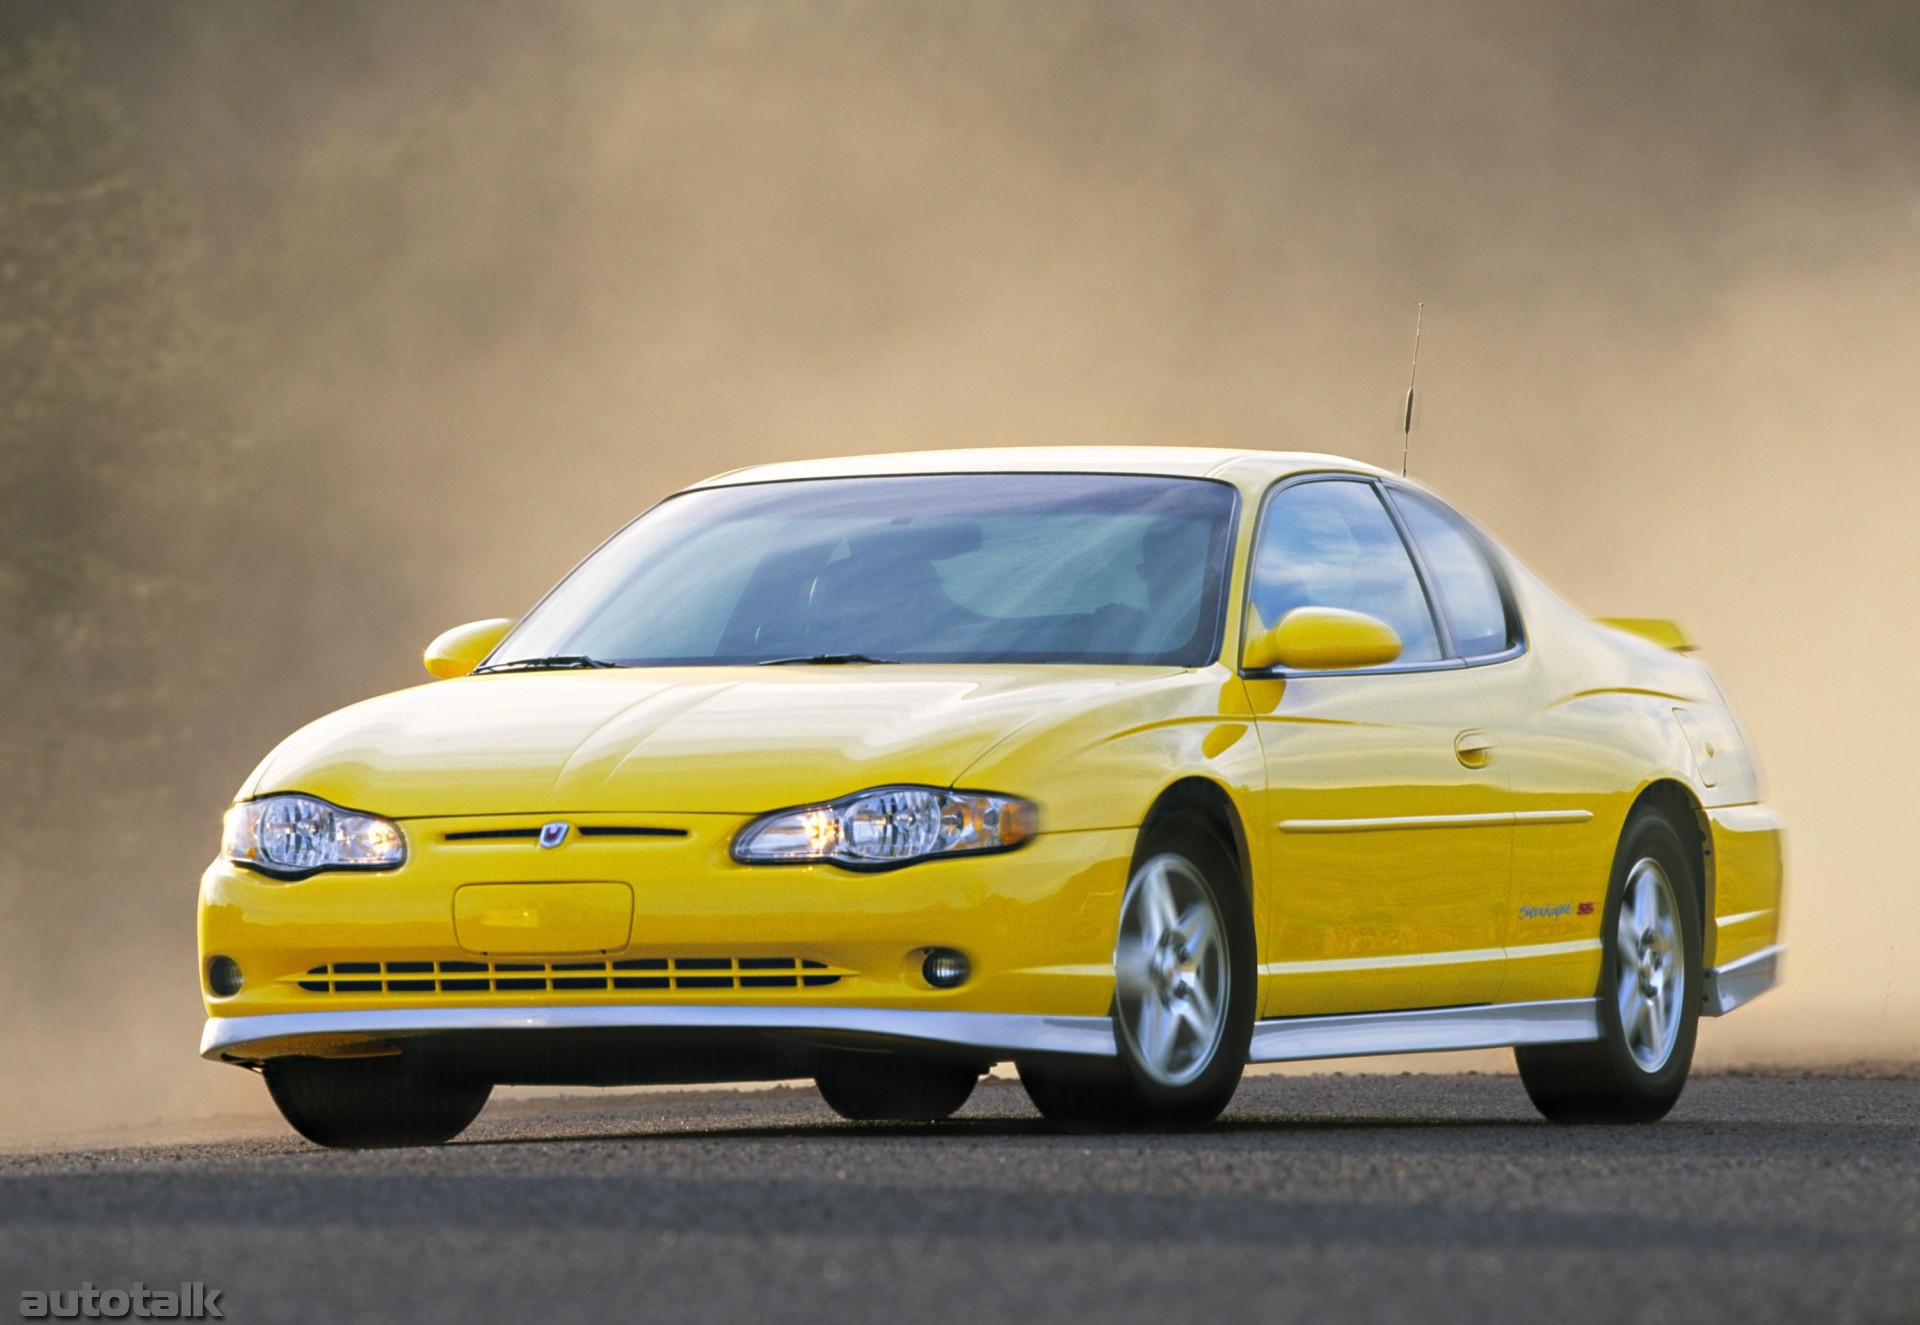 2005 Chevrolet Monte Carlo Supercharged SS